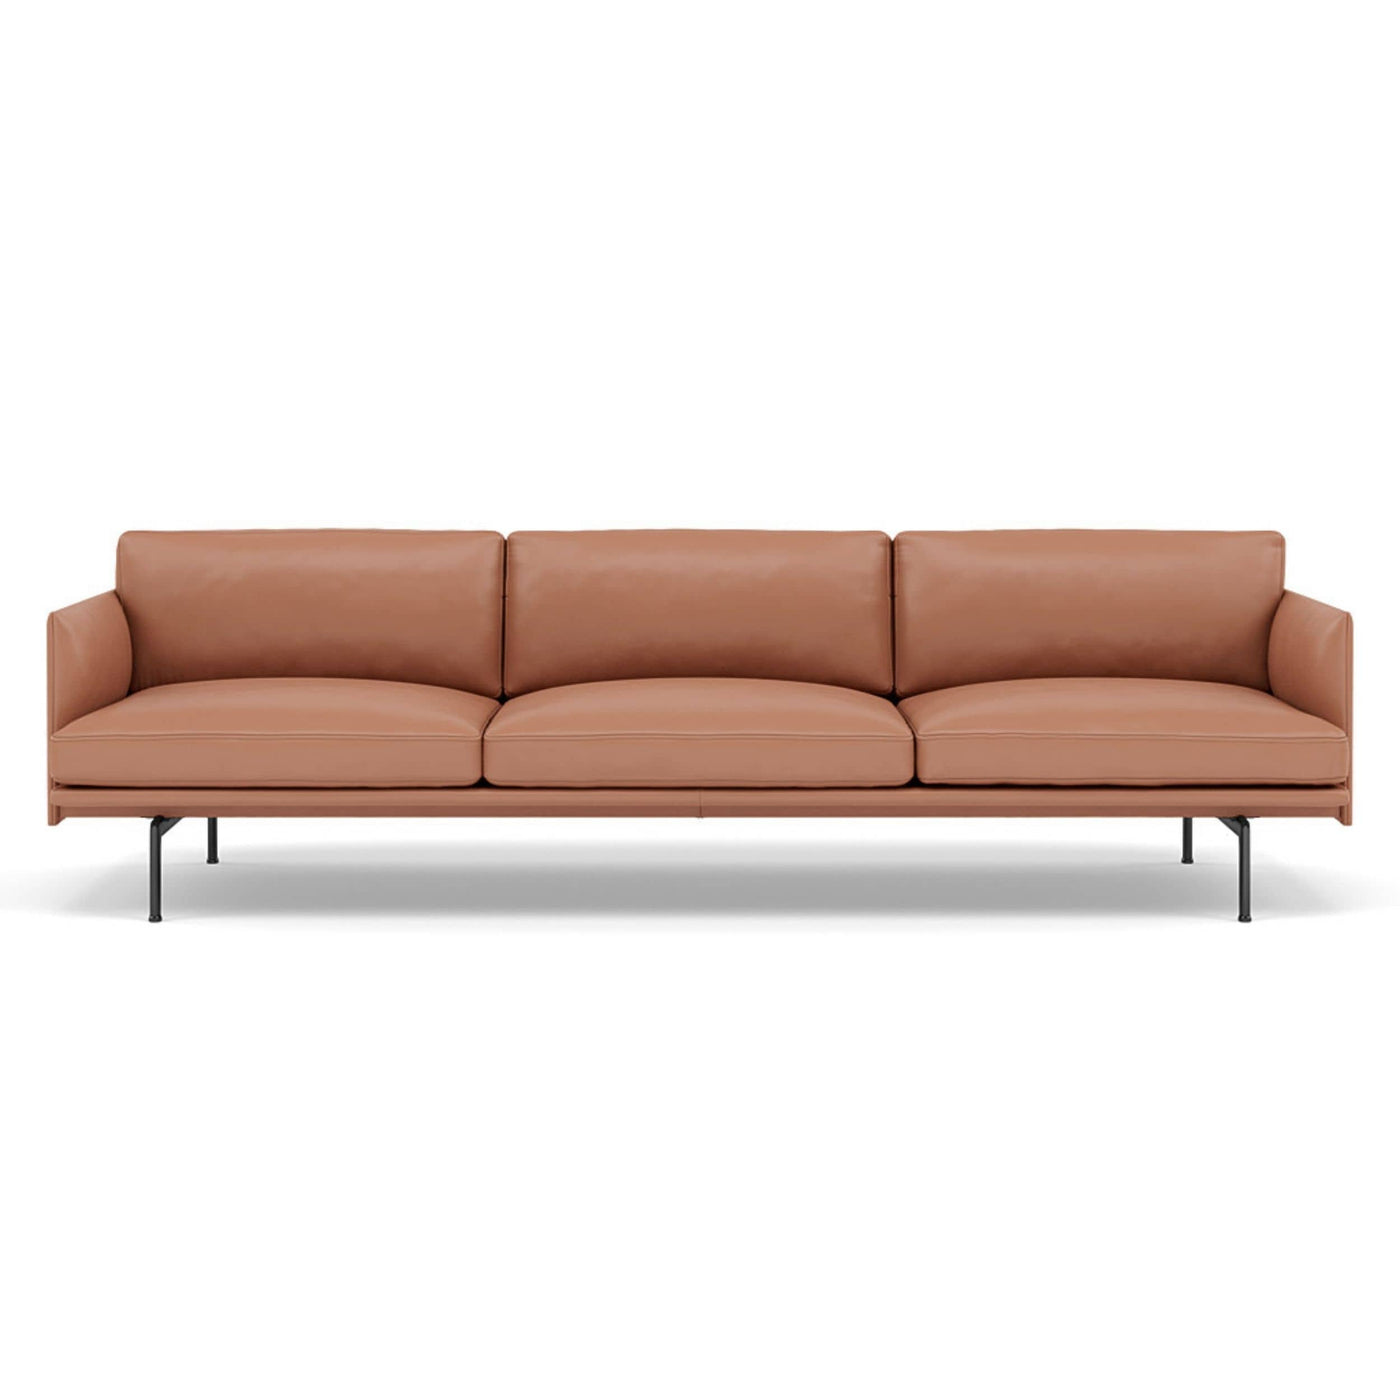 muuto outline 3.5 seater sofa in cognac refine leather and black legs. Made to order from someday designs. #colour_cognac-refine-leather